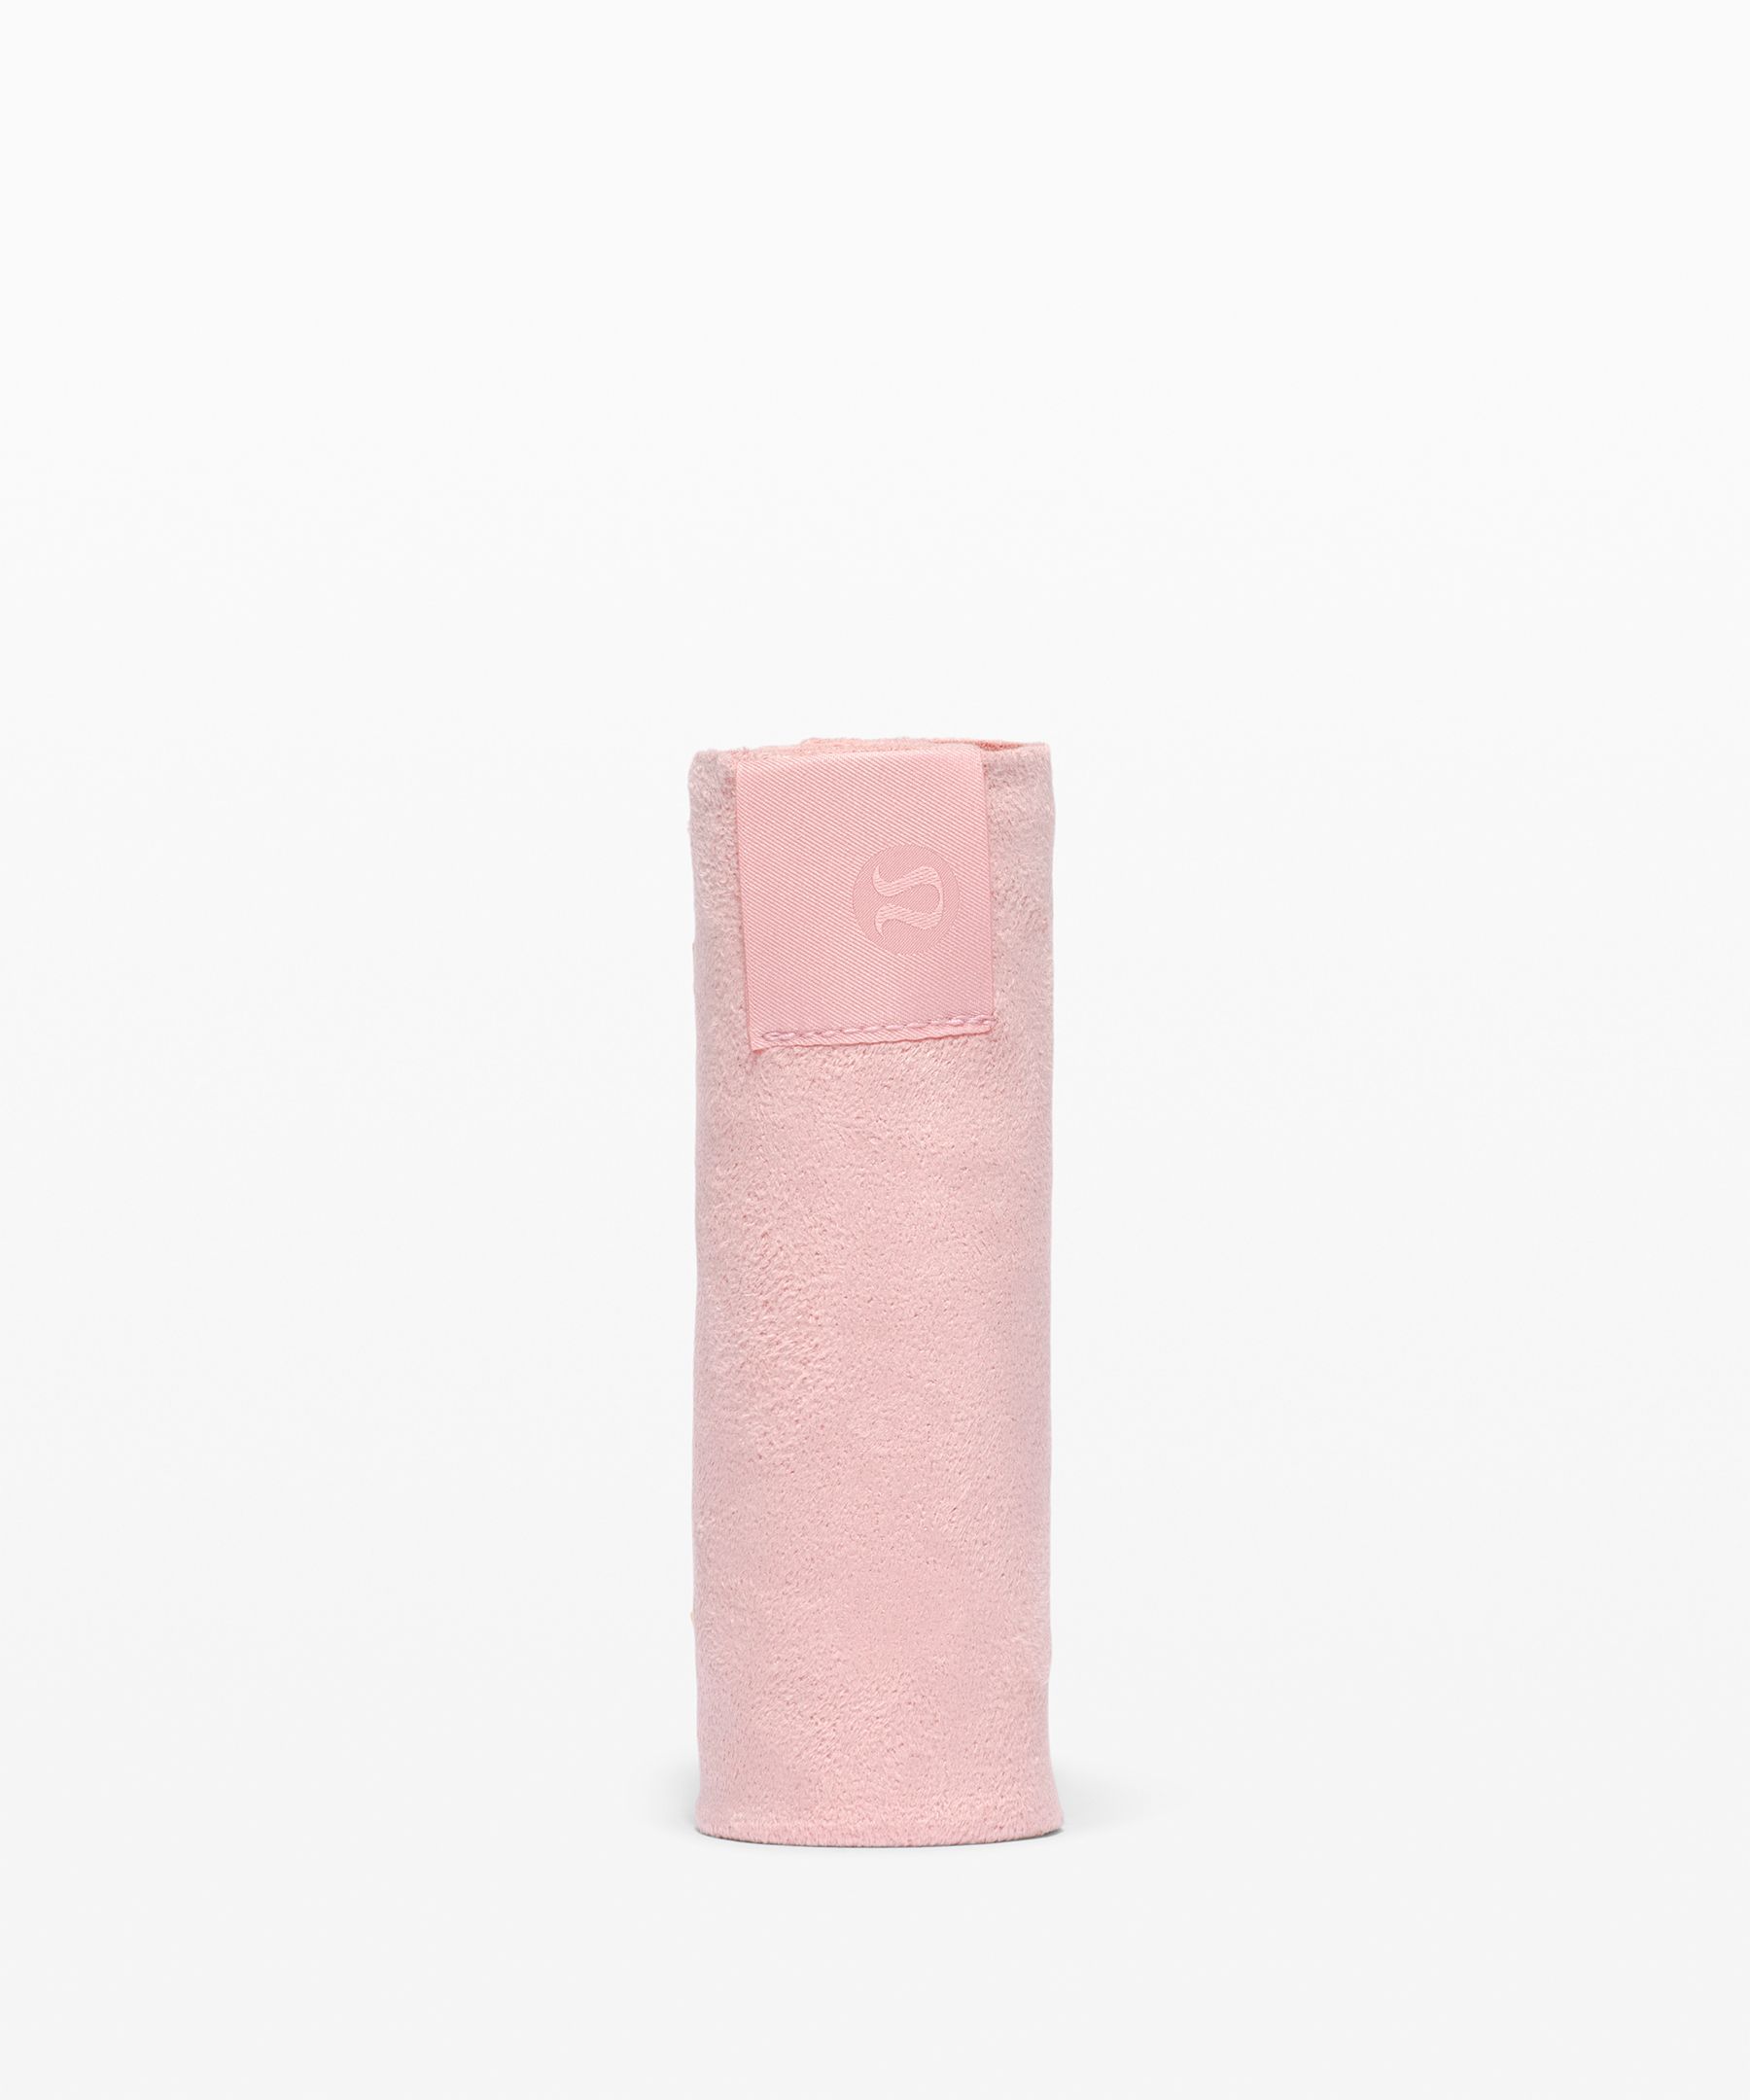 Lululemon The Small Towel In Pink Puff